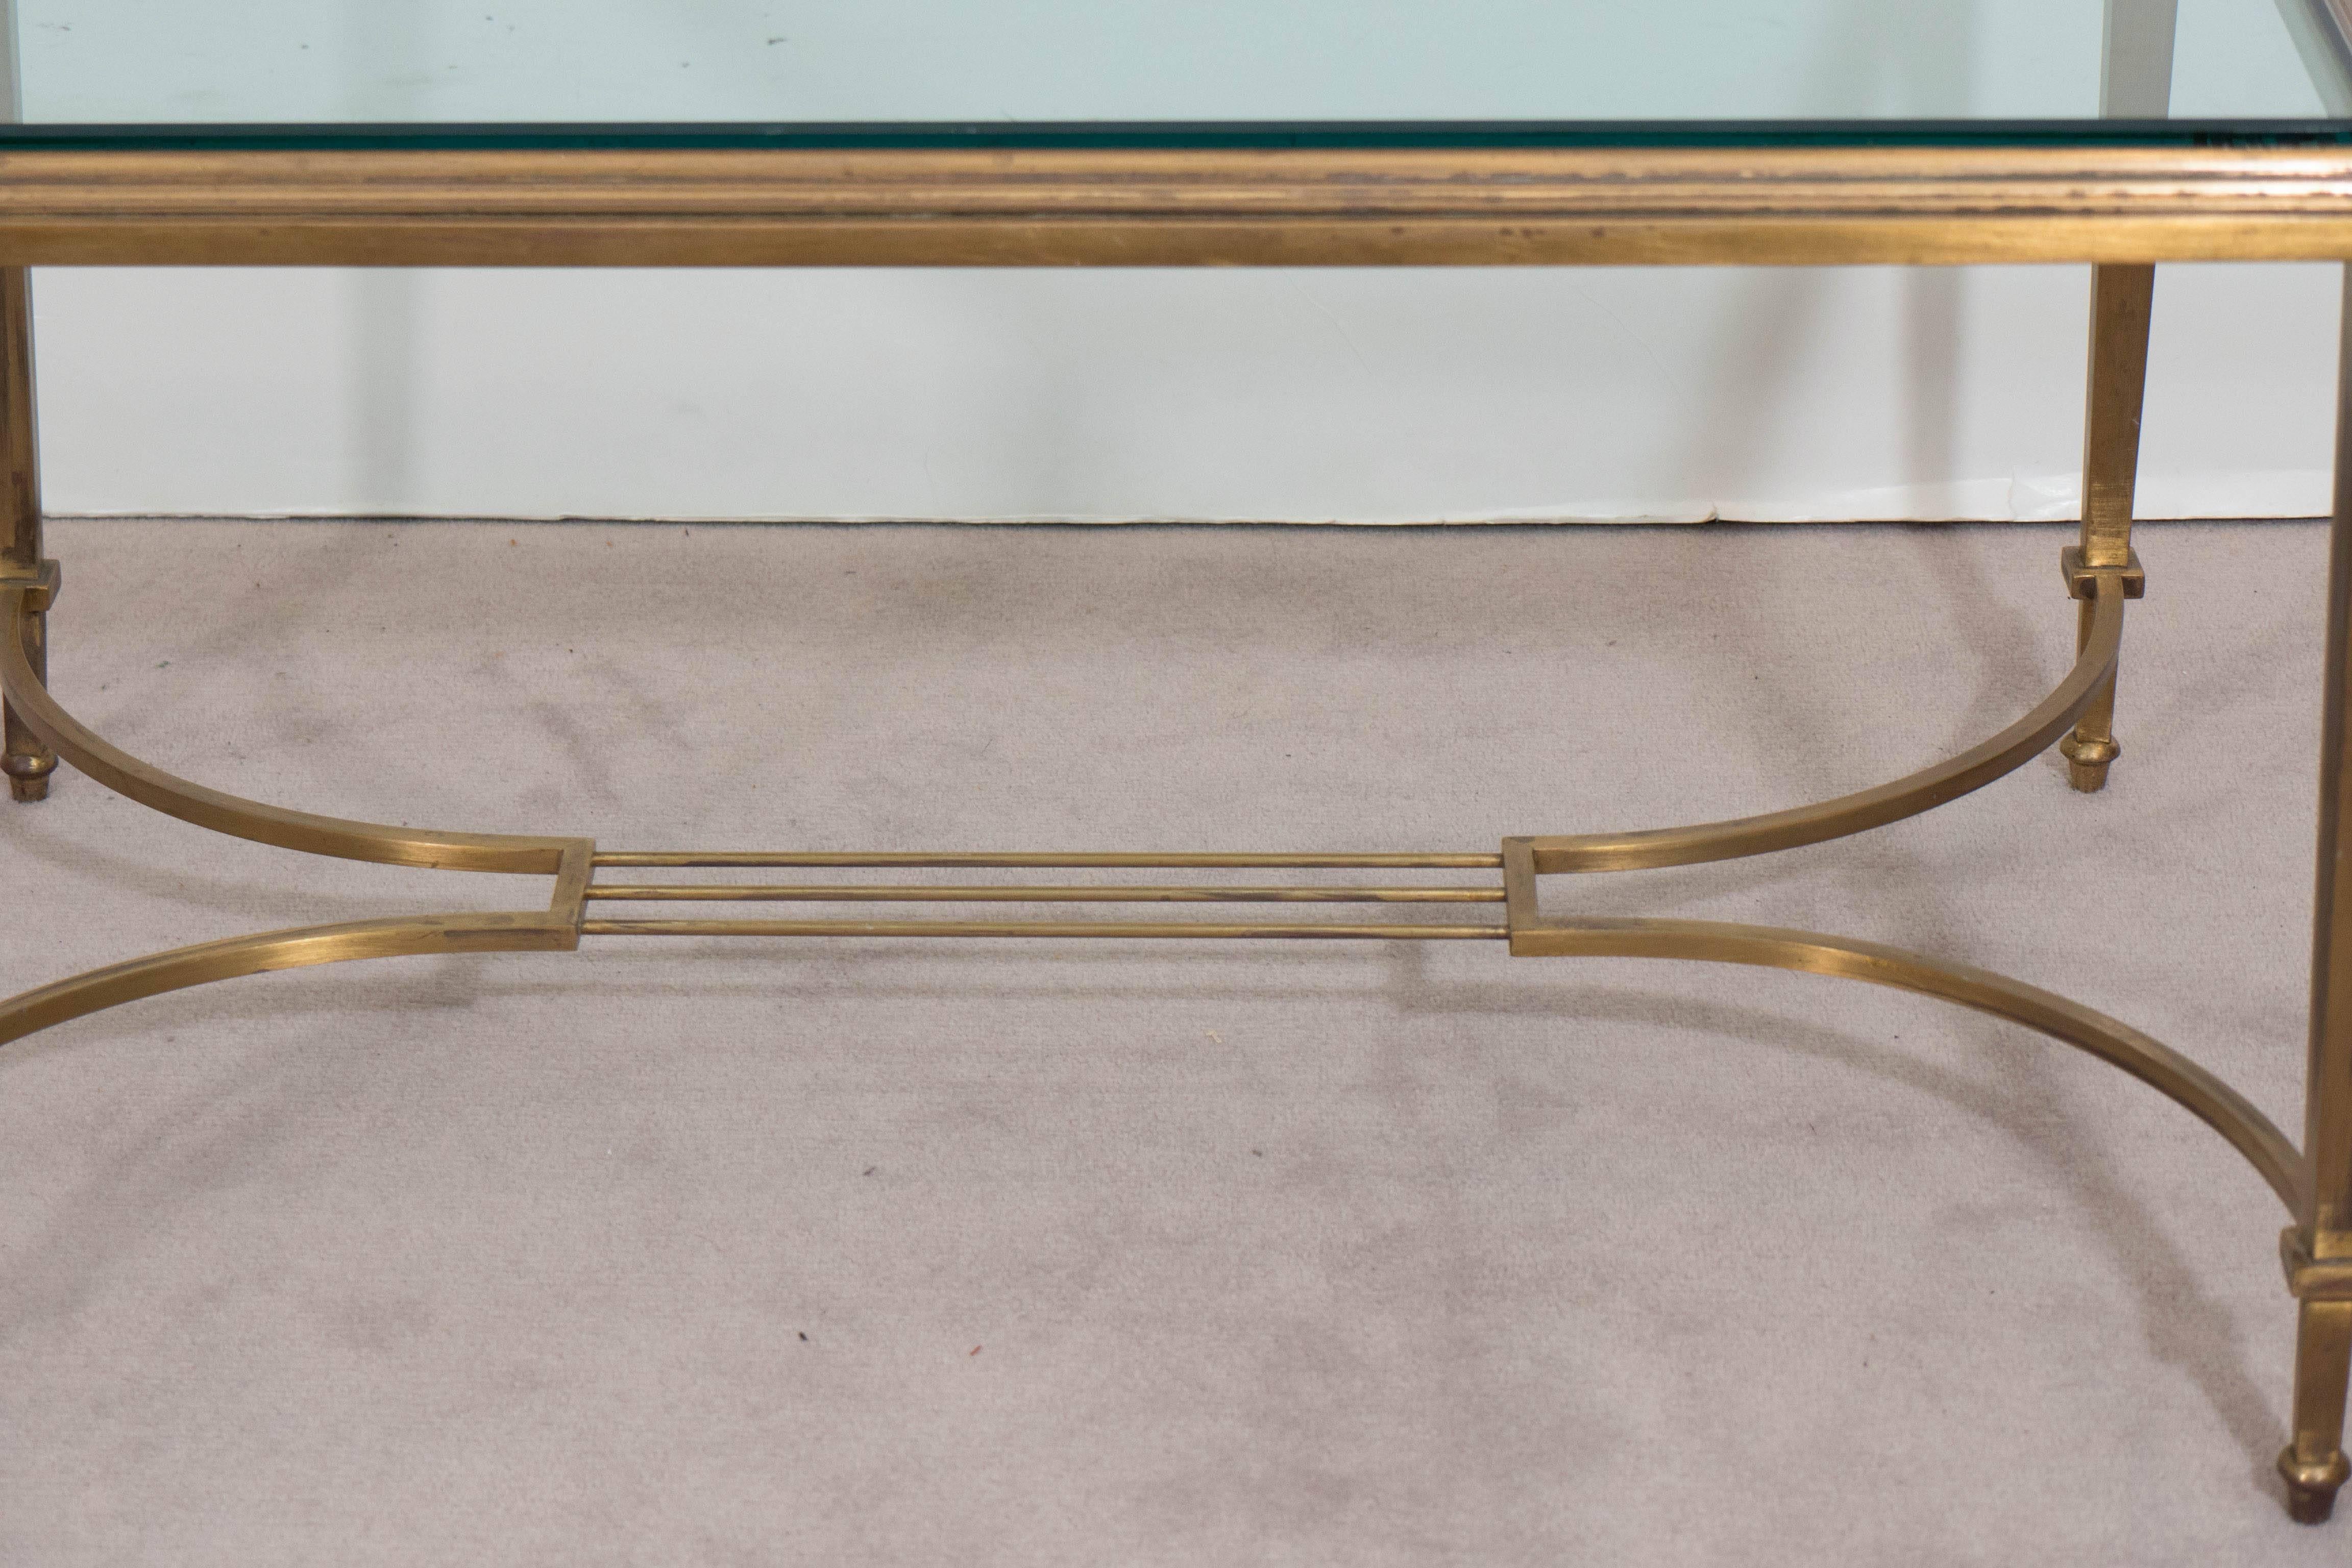 A vintage coffee table designed in the neoclassical taste circa 1950s, with glass top on a beveled brass frame and tapered legs, with harp form stretcher. This piece is in good condition, with age appropriate wear to finish, as well as minor